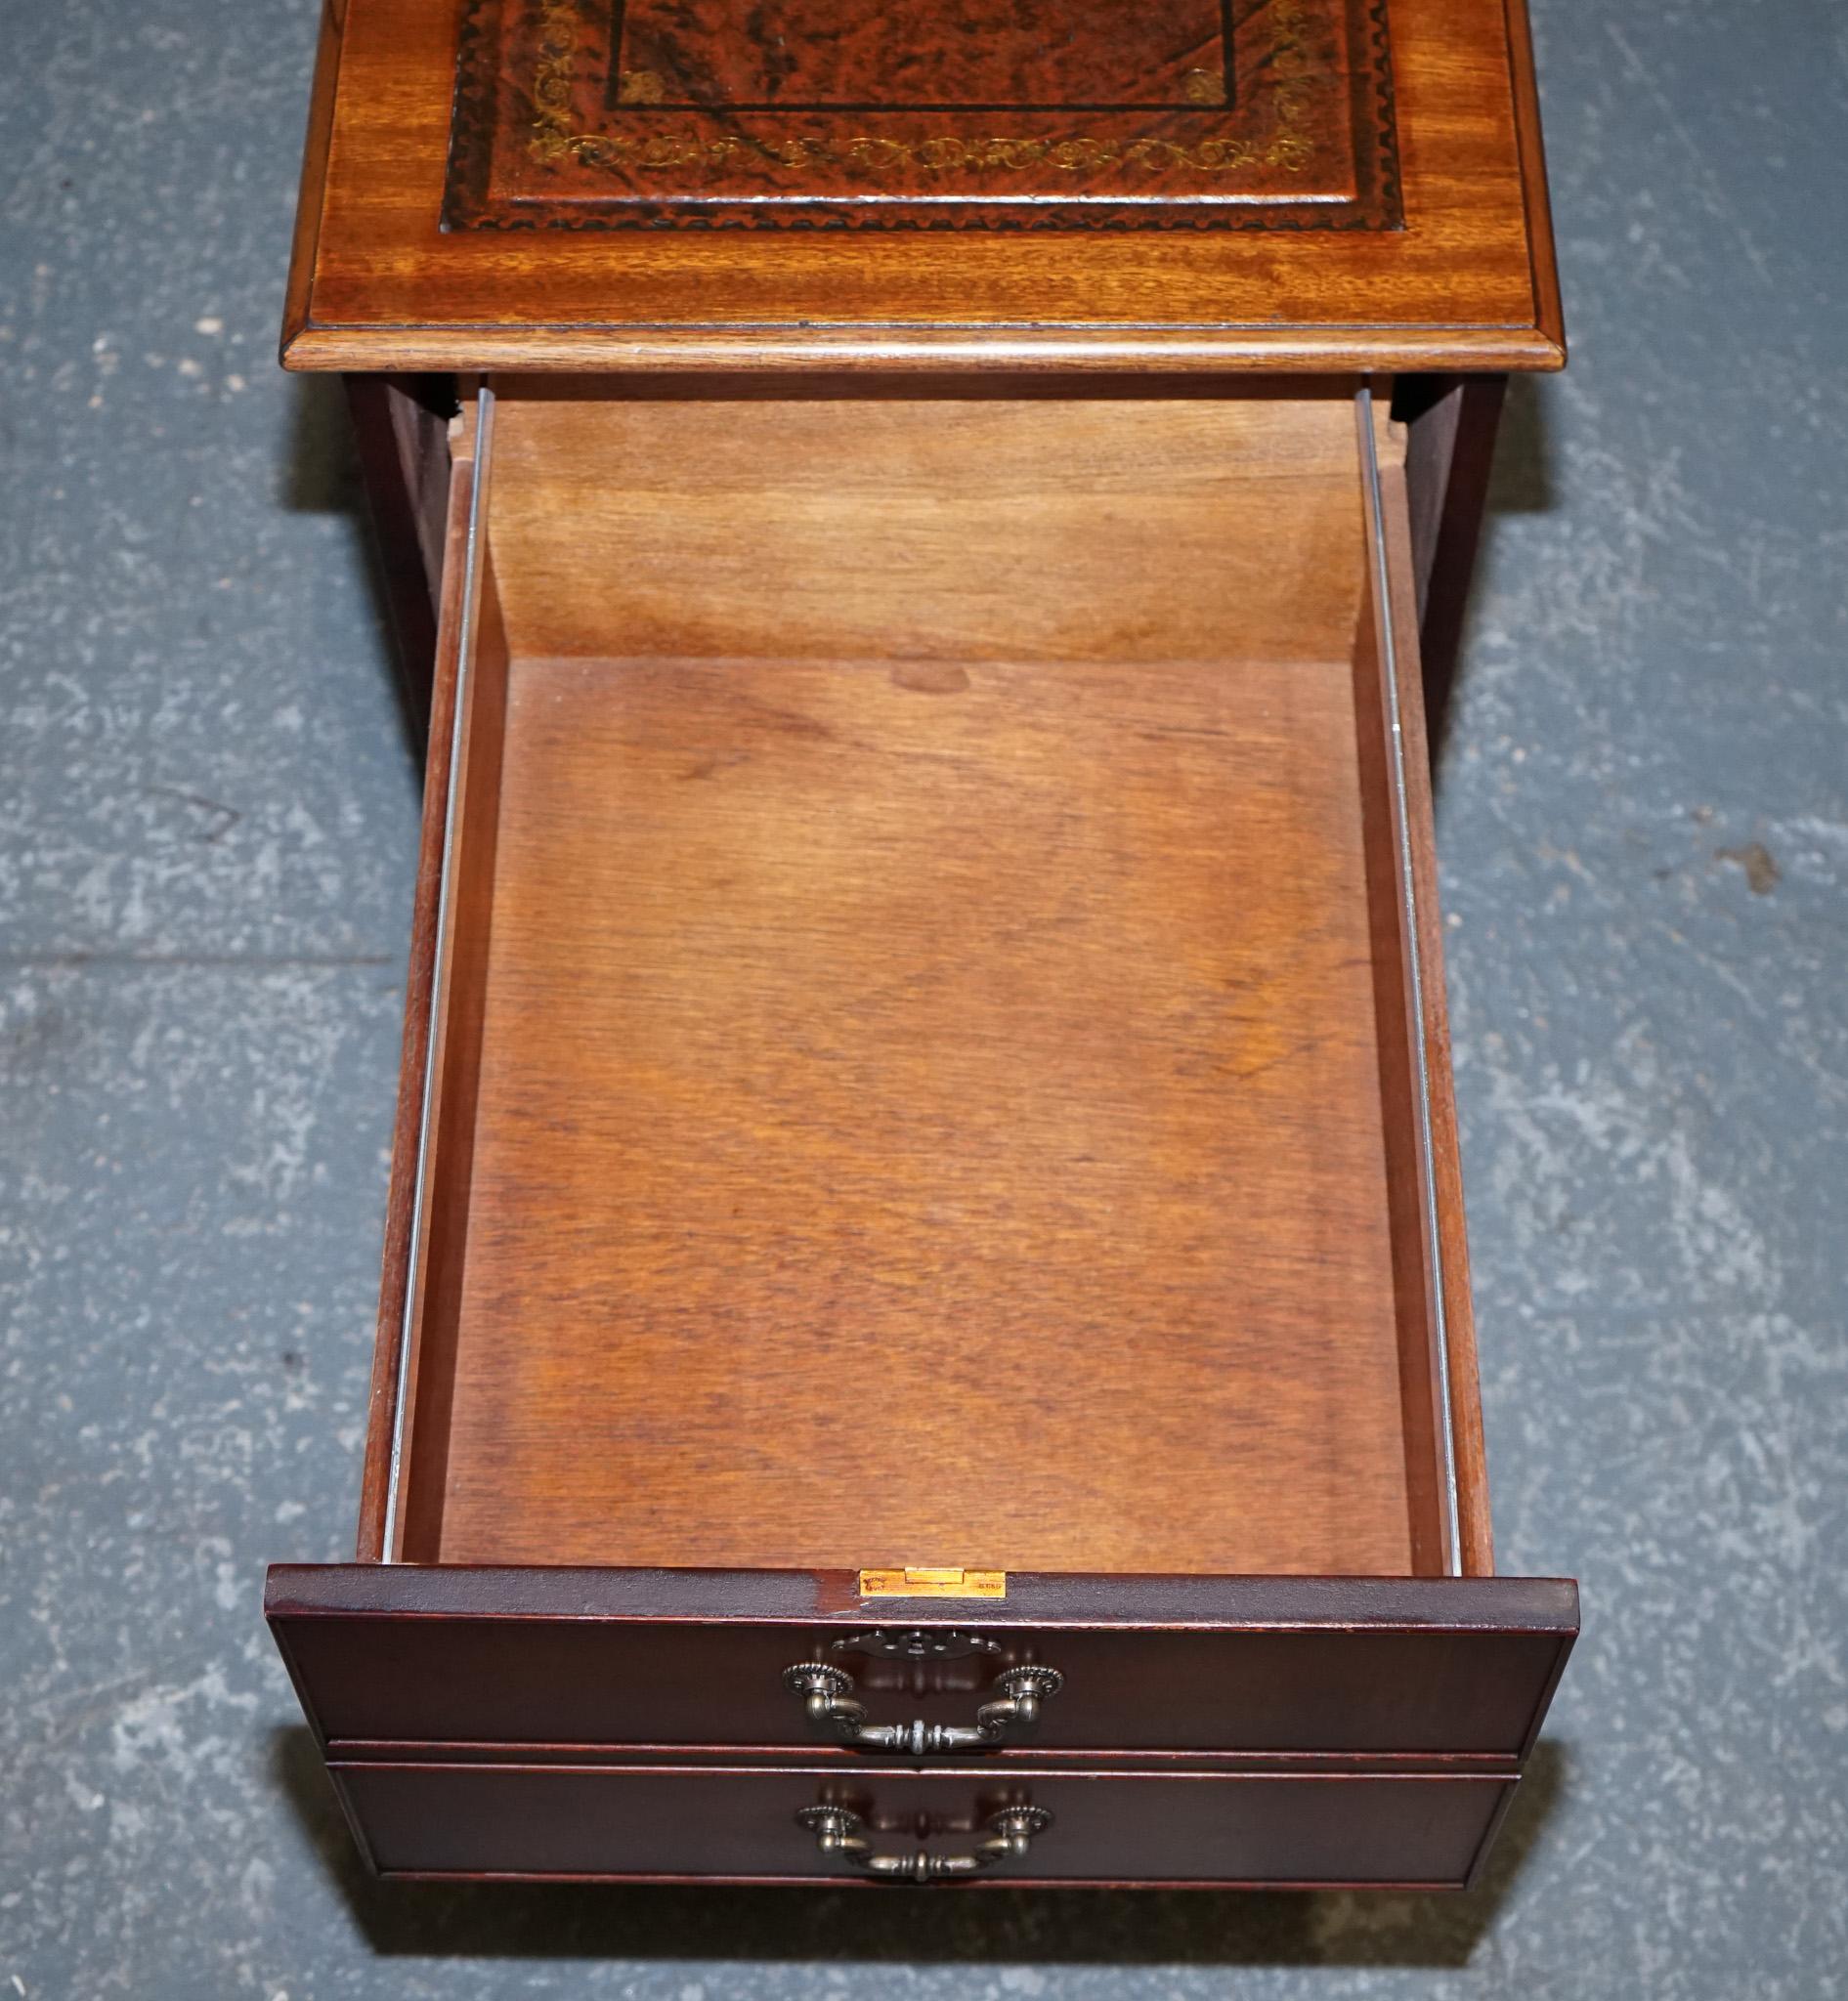 GOLD EMBOSSED BROWN LEATHER TOP FILLING CABiNET - MATCHING DESK AVAILABLE In Good Condition For Sale In Pulborough, GB